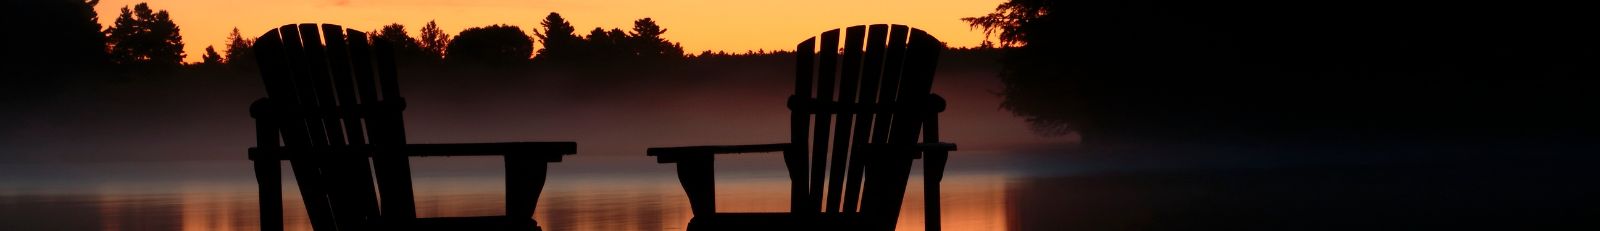 Image of two lawn chairs sitting at end of dock on a lake.